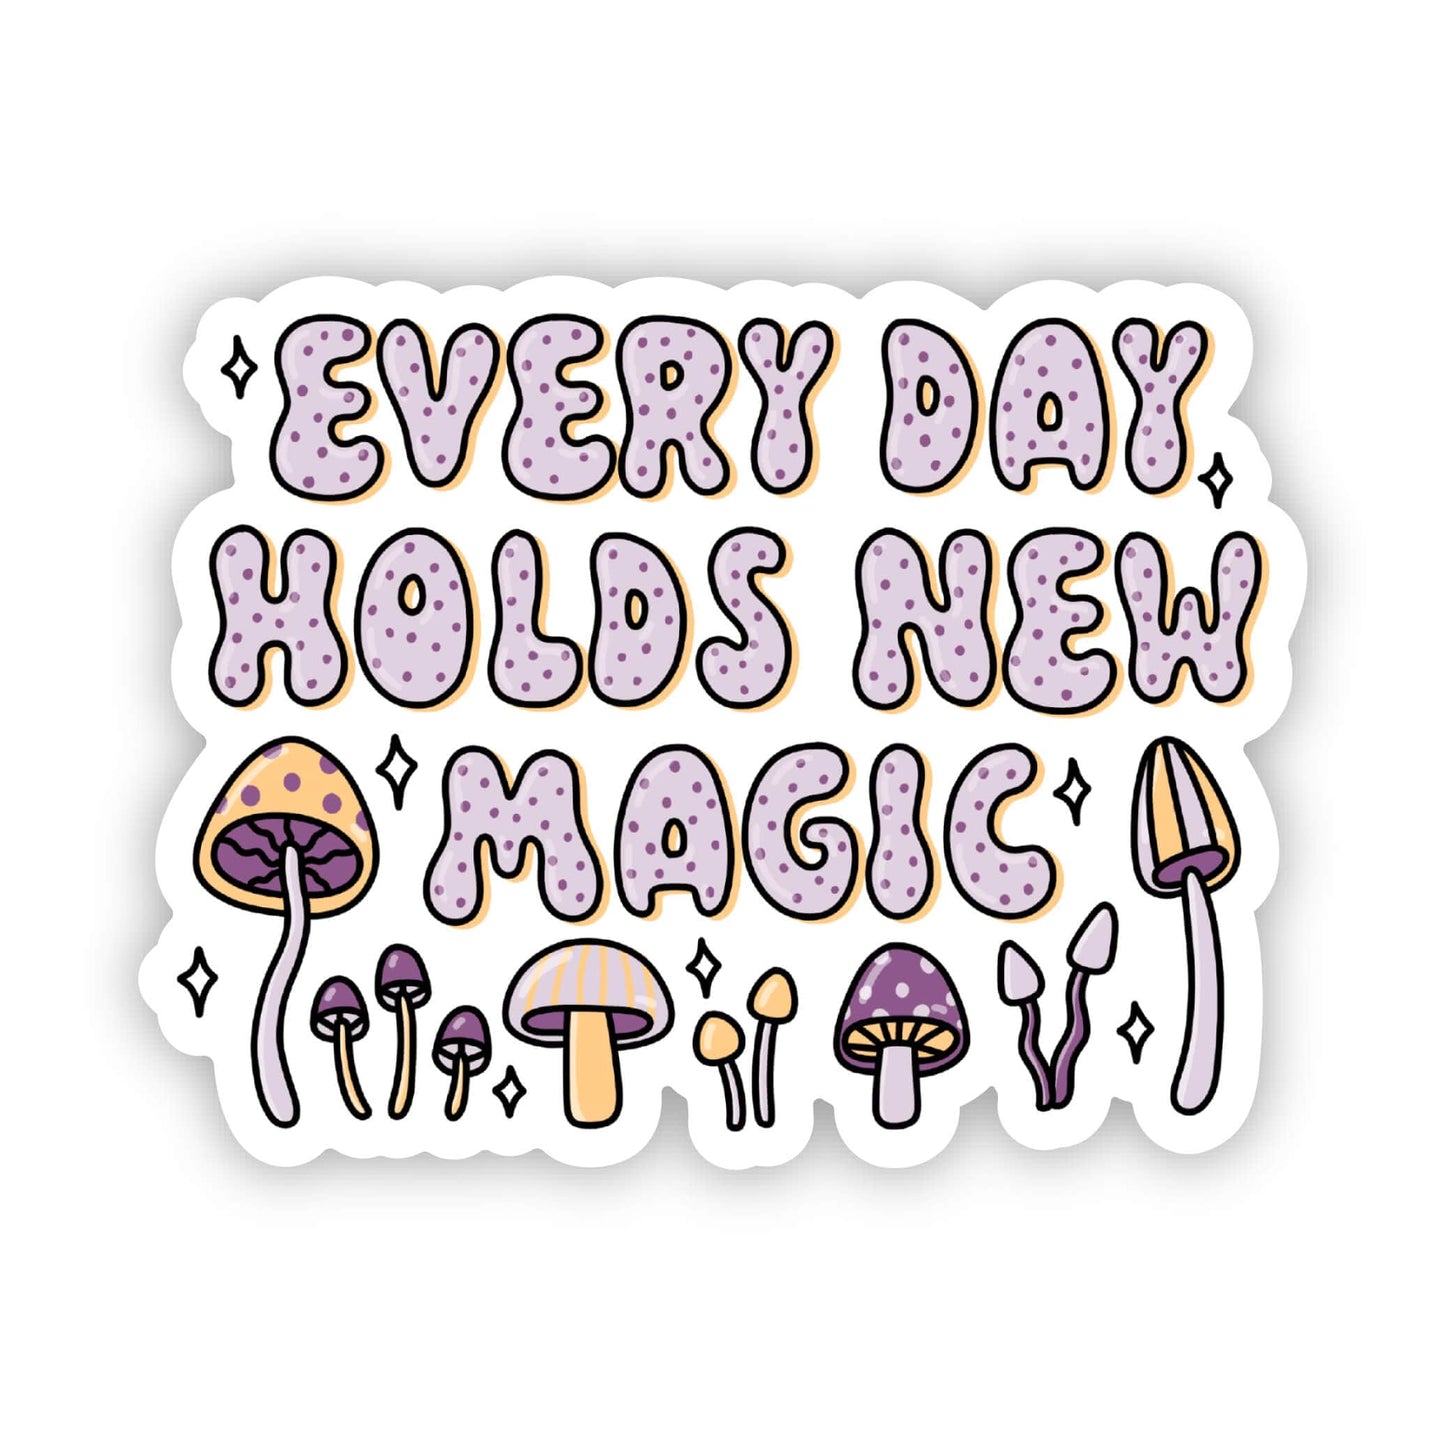 Big Moods - "Every day holds new magic" sticker